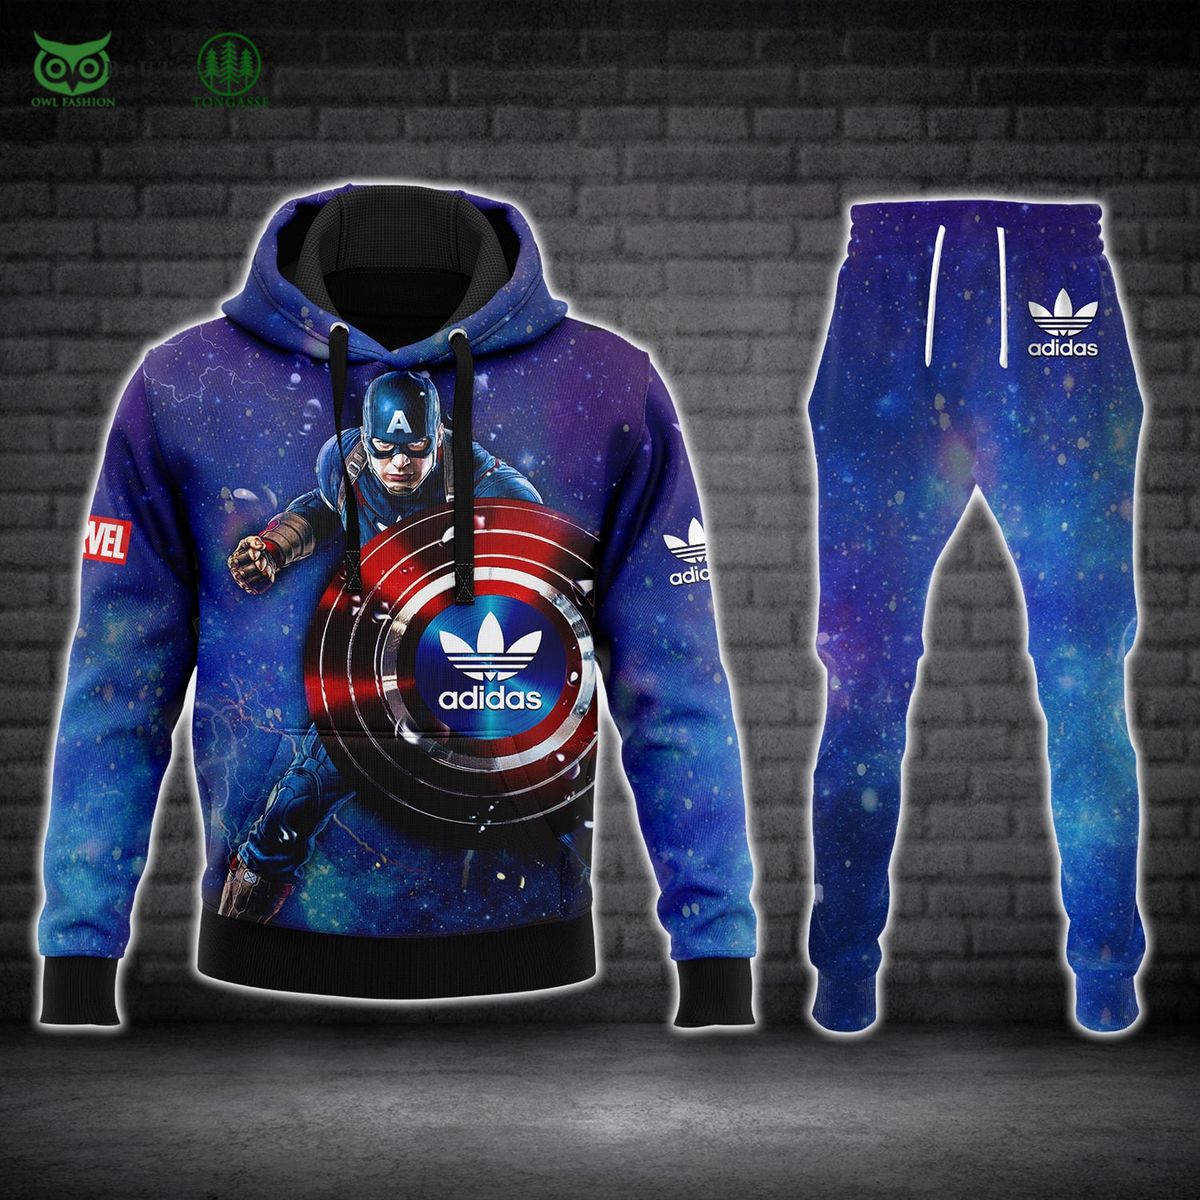 captain america adidas hoodie and pants galaxy 1 D1lNG